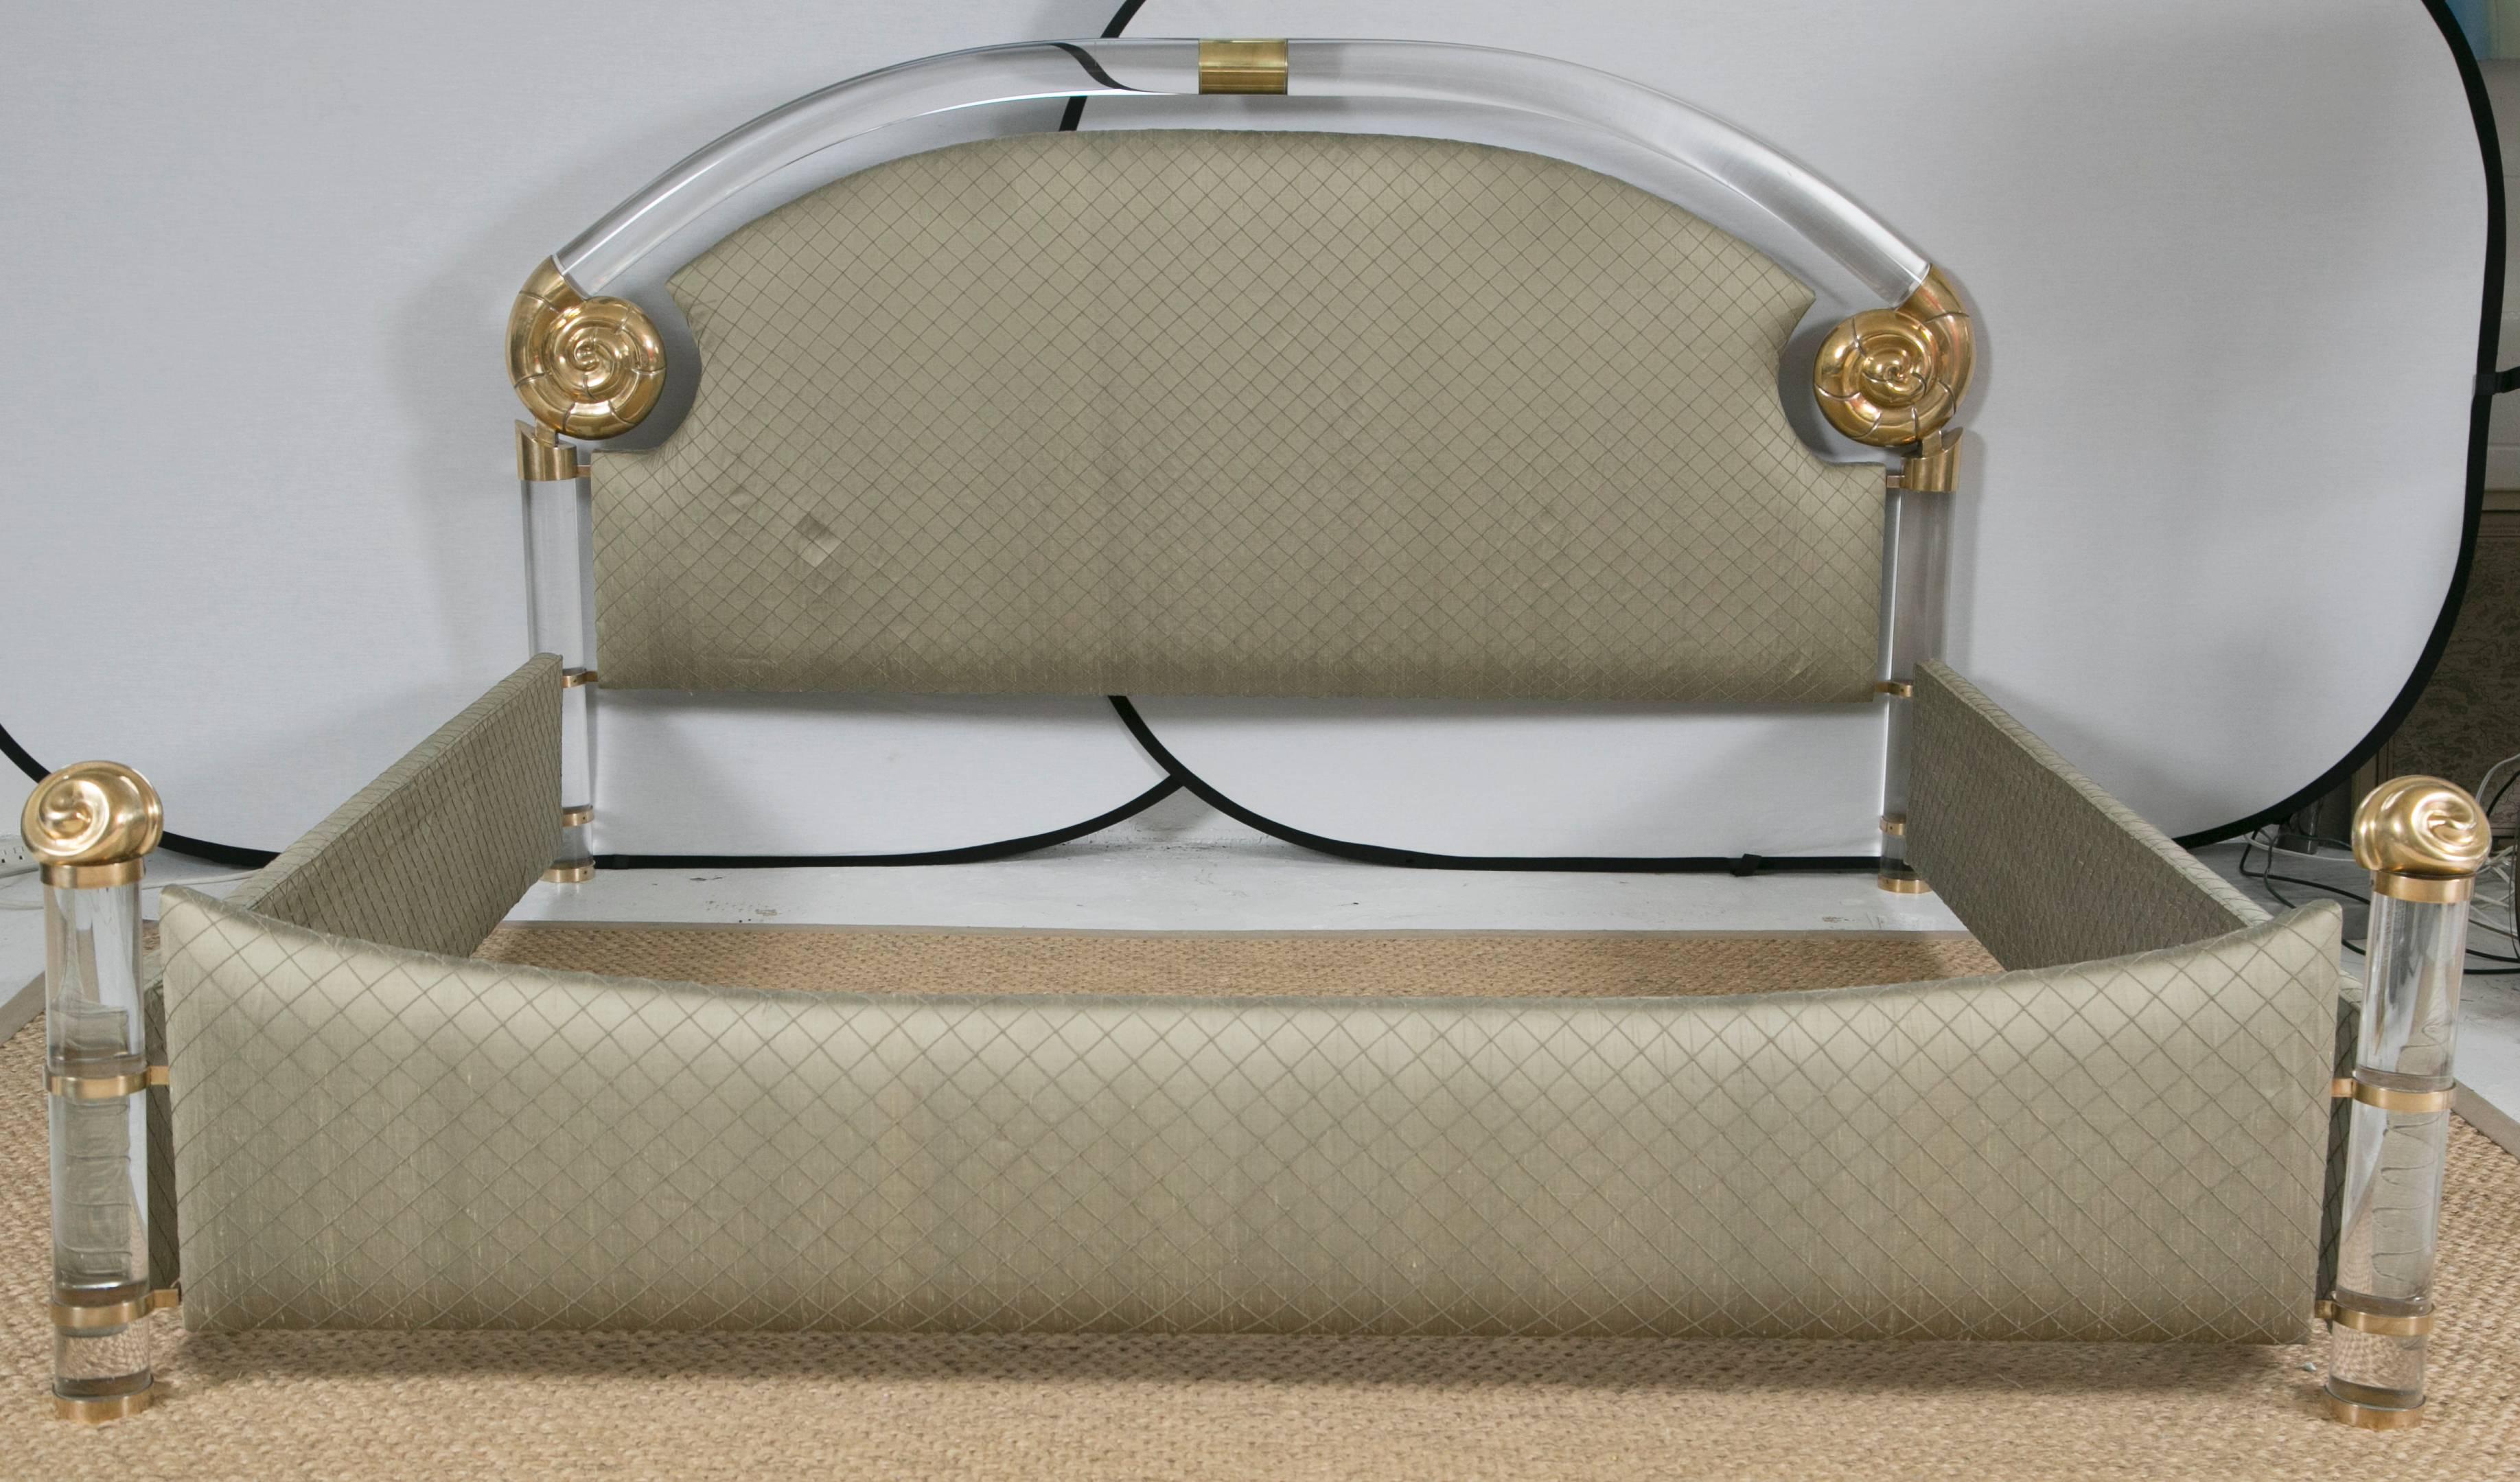 Glamorous does not say it all for this fabulous piece designed by Marcello Mioni. Using some of the thickest and heaviest Lucite we've ever seen, the bed is crafted and joined together by solid brass shell motif accents. It is truly a rare site and